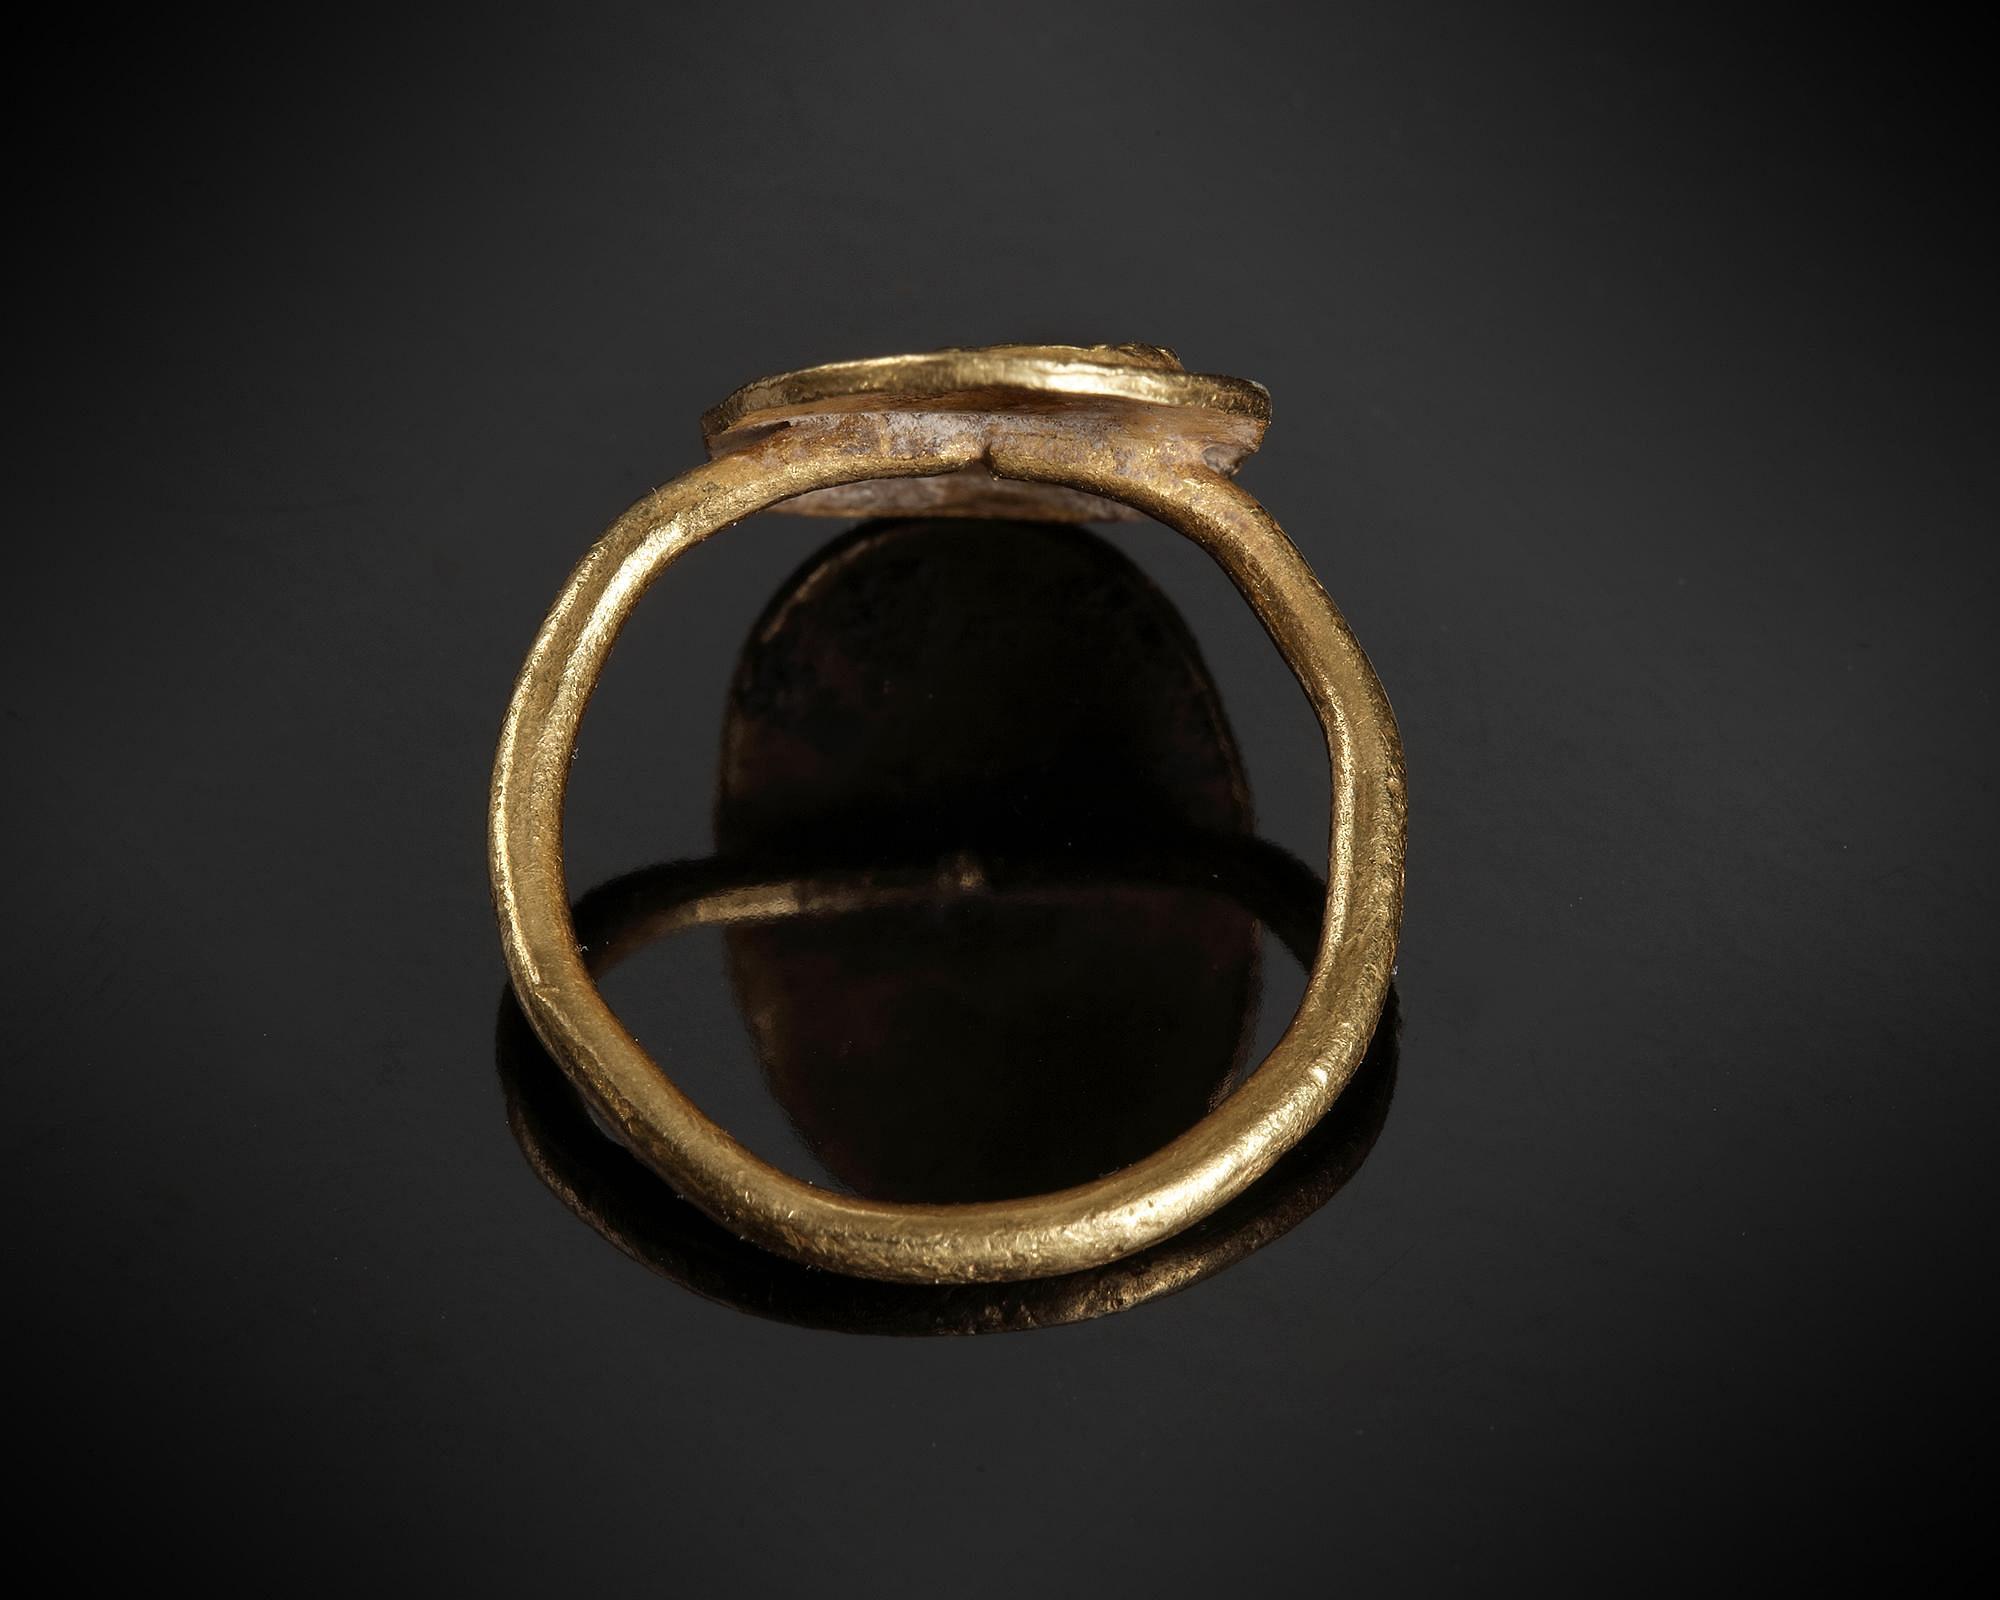 A BYZANTINE GOLD RING WITH A LION FACING LEFT, CIRCA 6TH CENTURY A.D. - Image 3 of 5